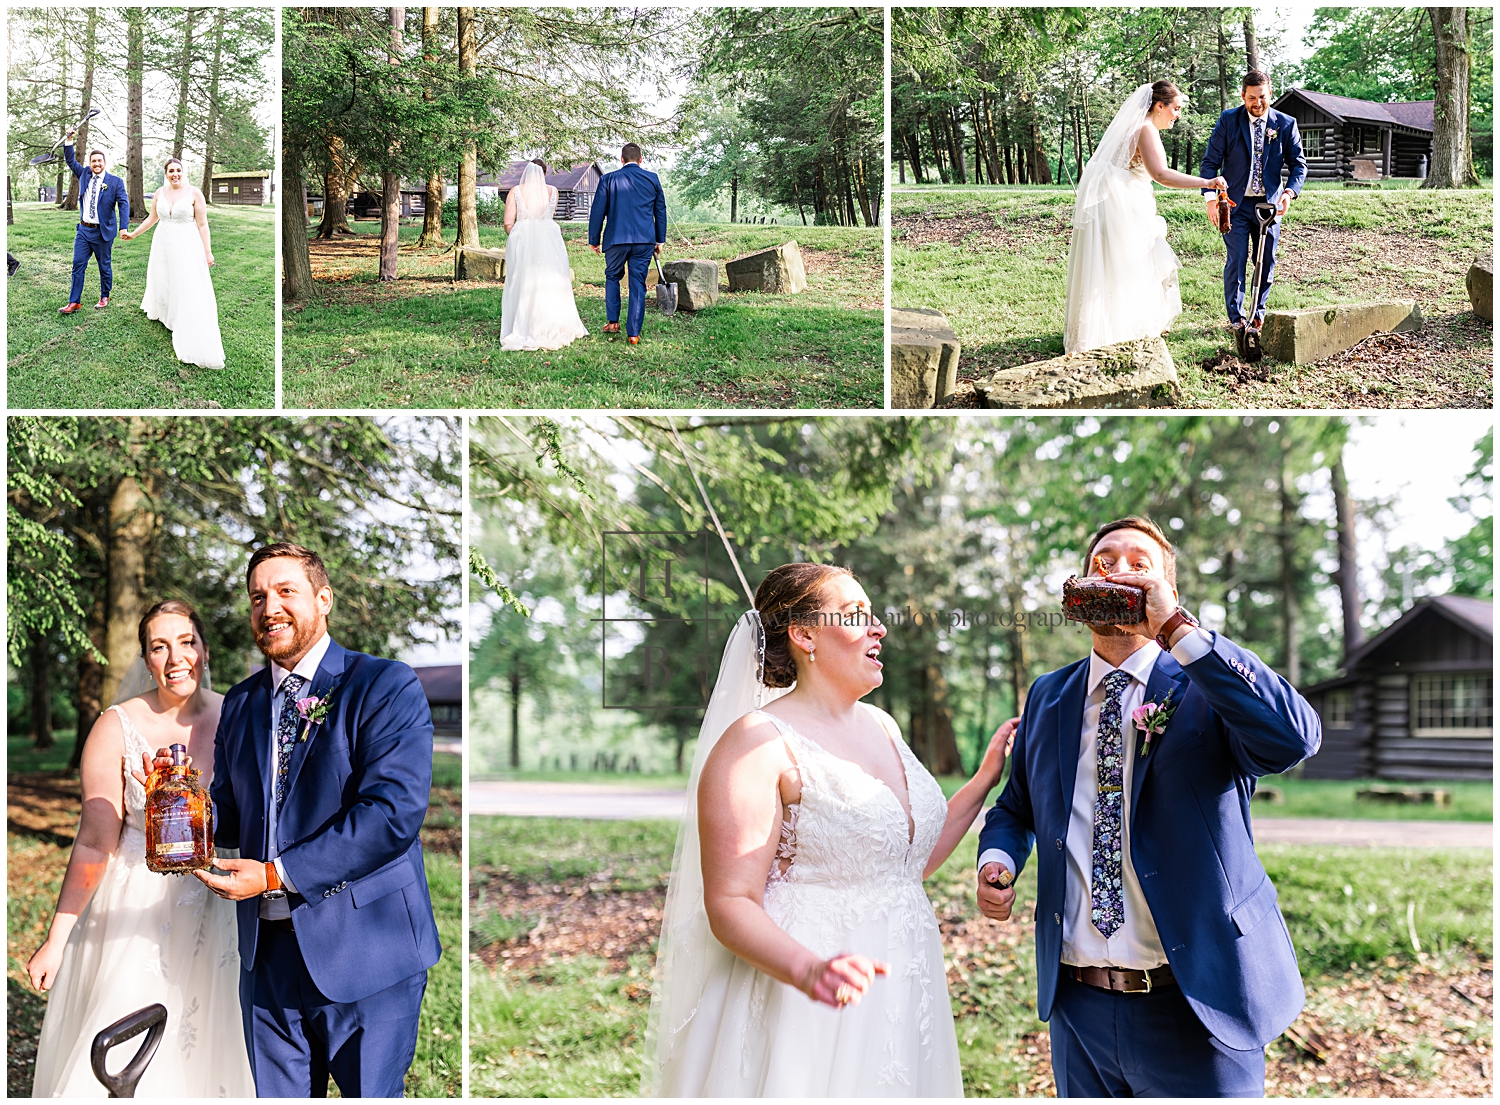 Couple digs up whiskey bottle on wedding day as a tradition.